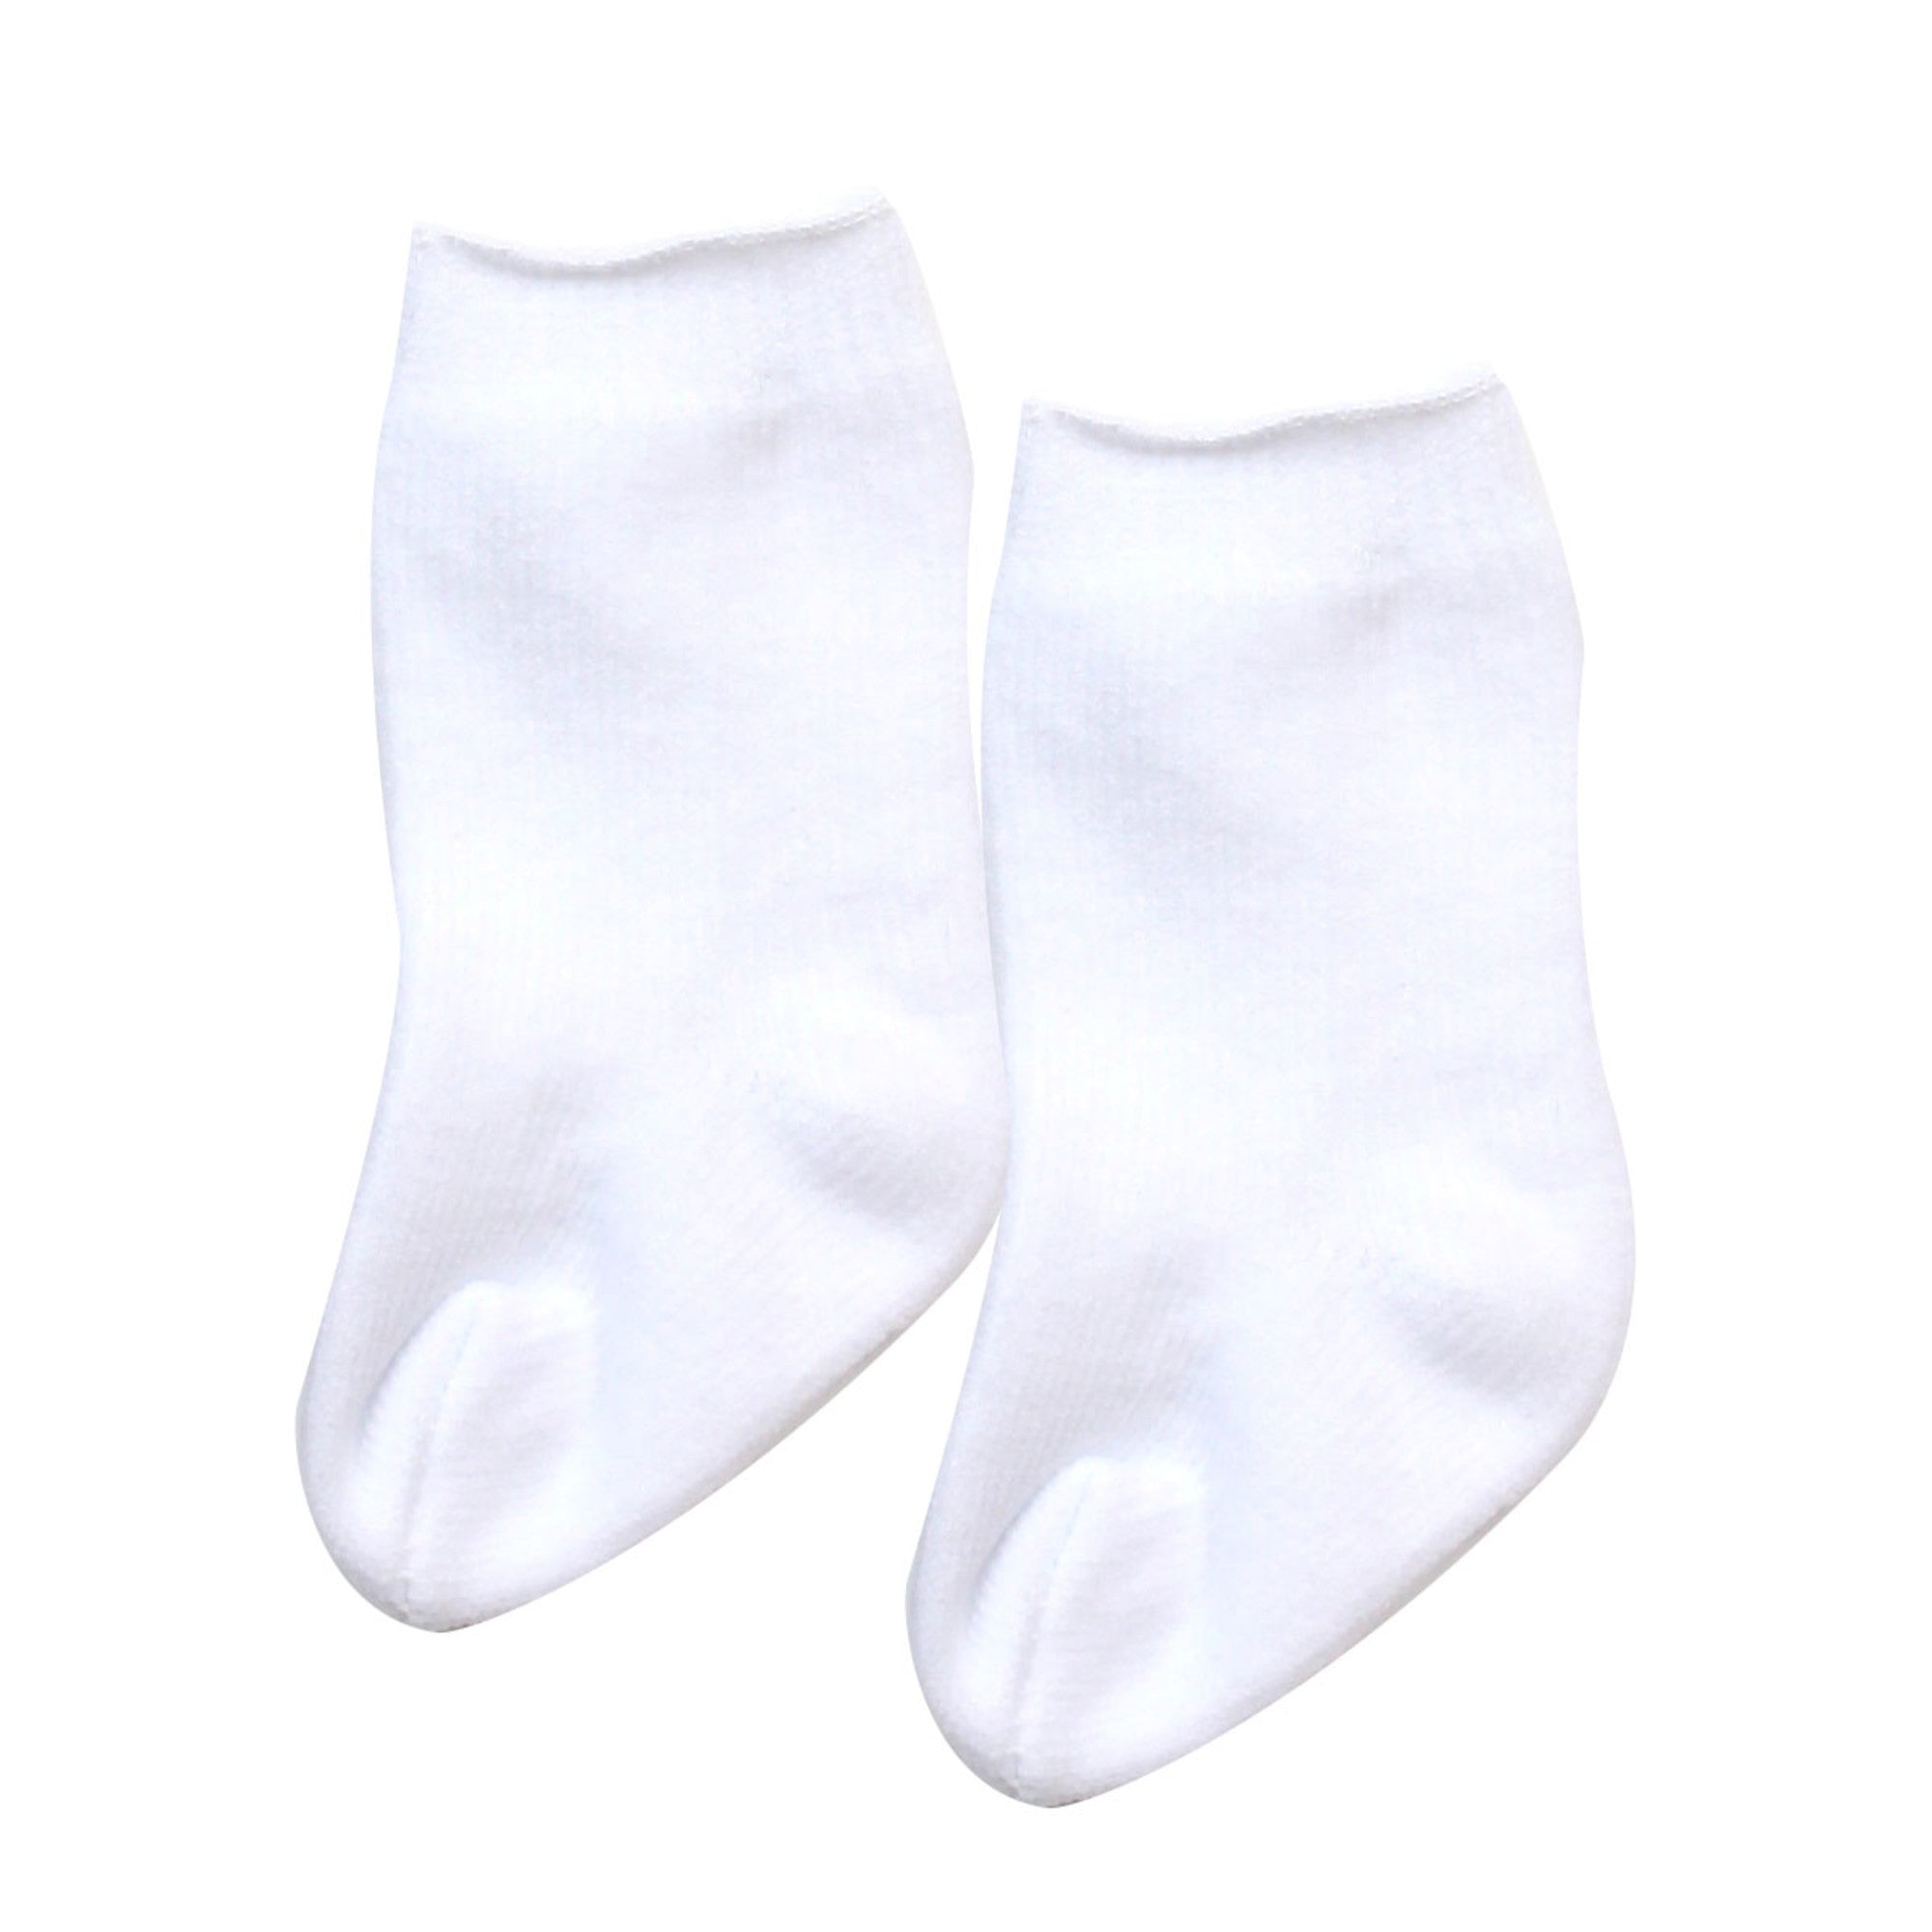 Sophia’s Mix & Match Wardrobe Essentials Basic Solid-Colored Knee Socks for 18” Dolls, White